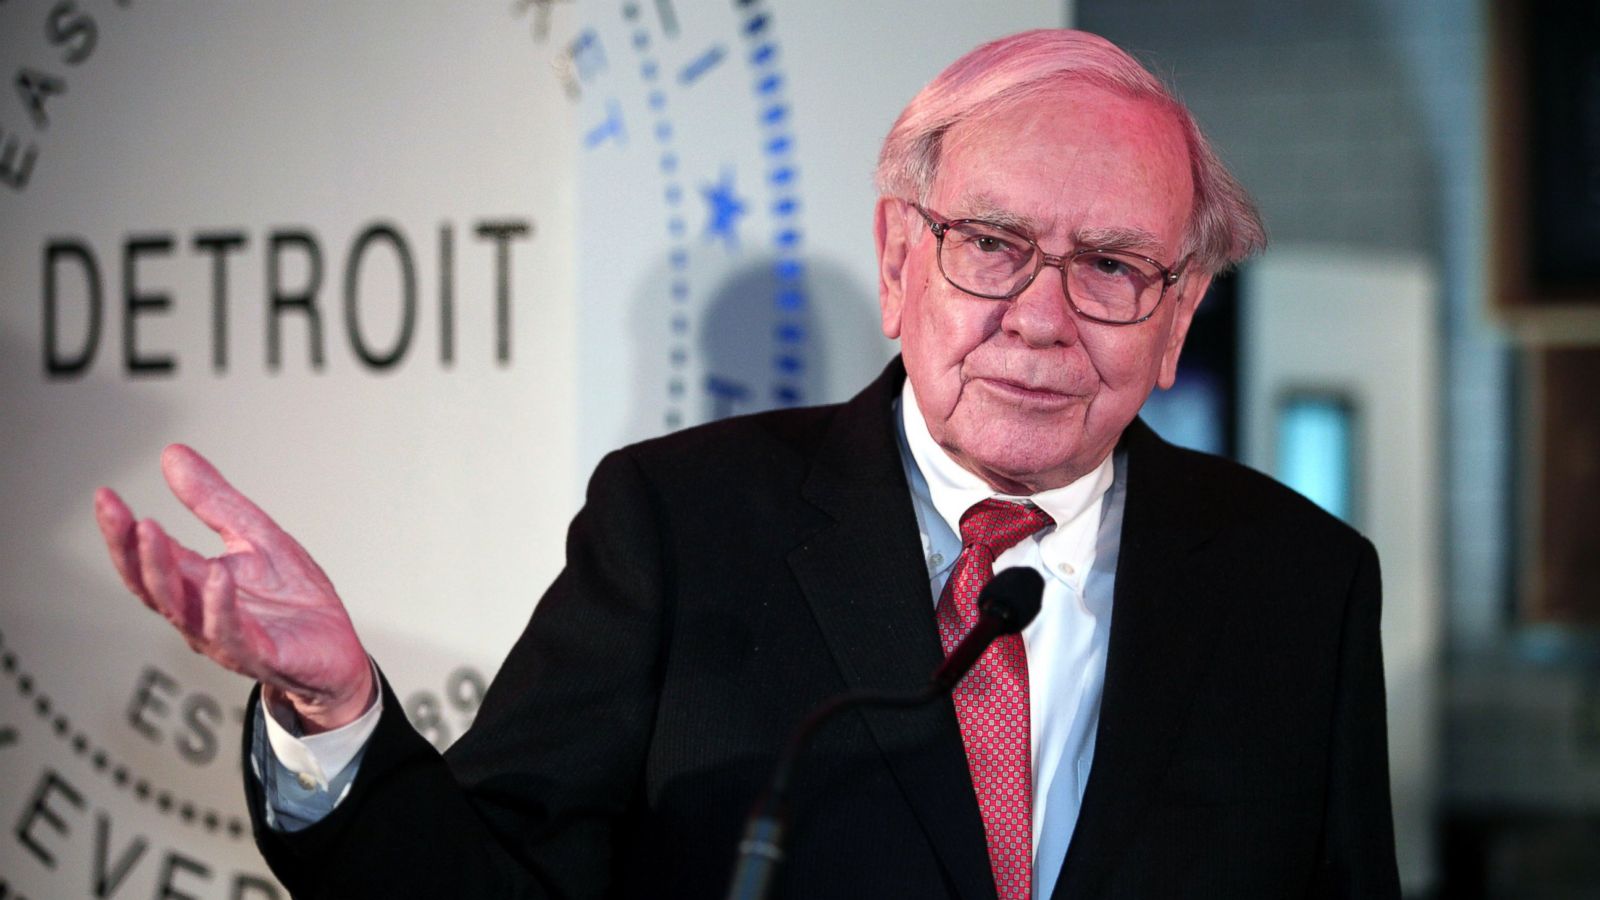 Berkshire Hathaway Boosts Japan's Stock Market with Increased Holdings in Trading Houses